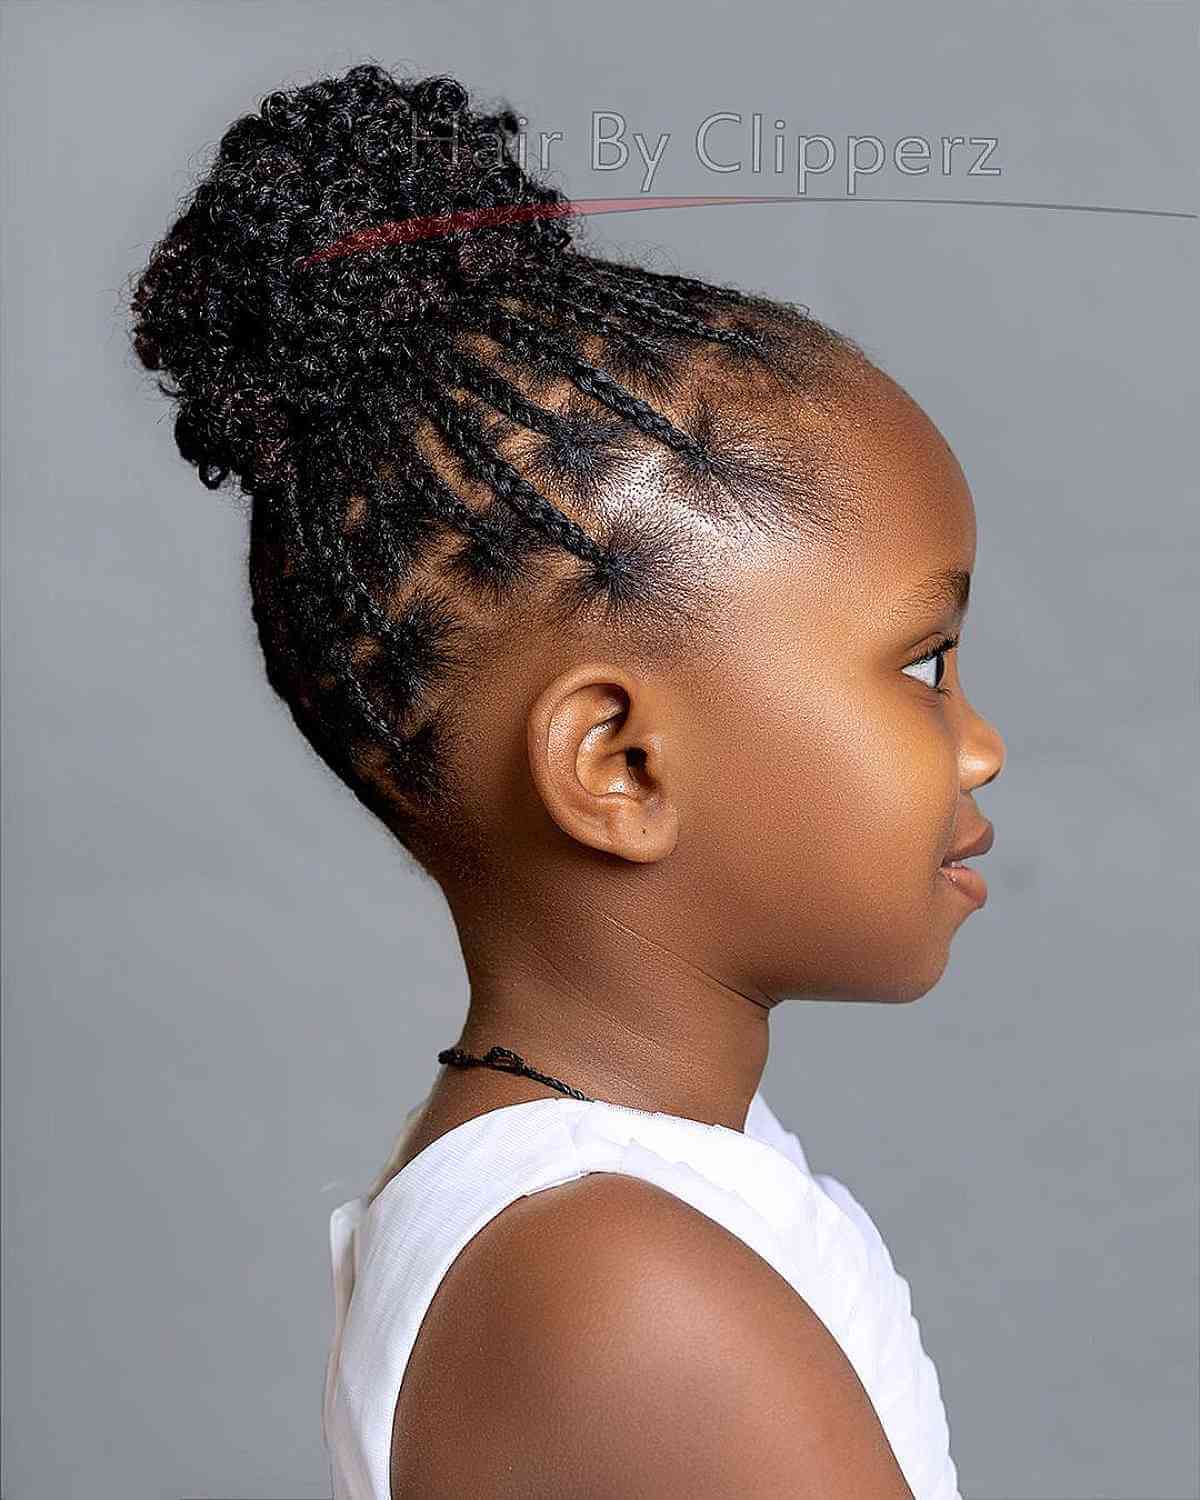 10 Quick and Easy Back to School Hairstyles for Kids